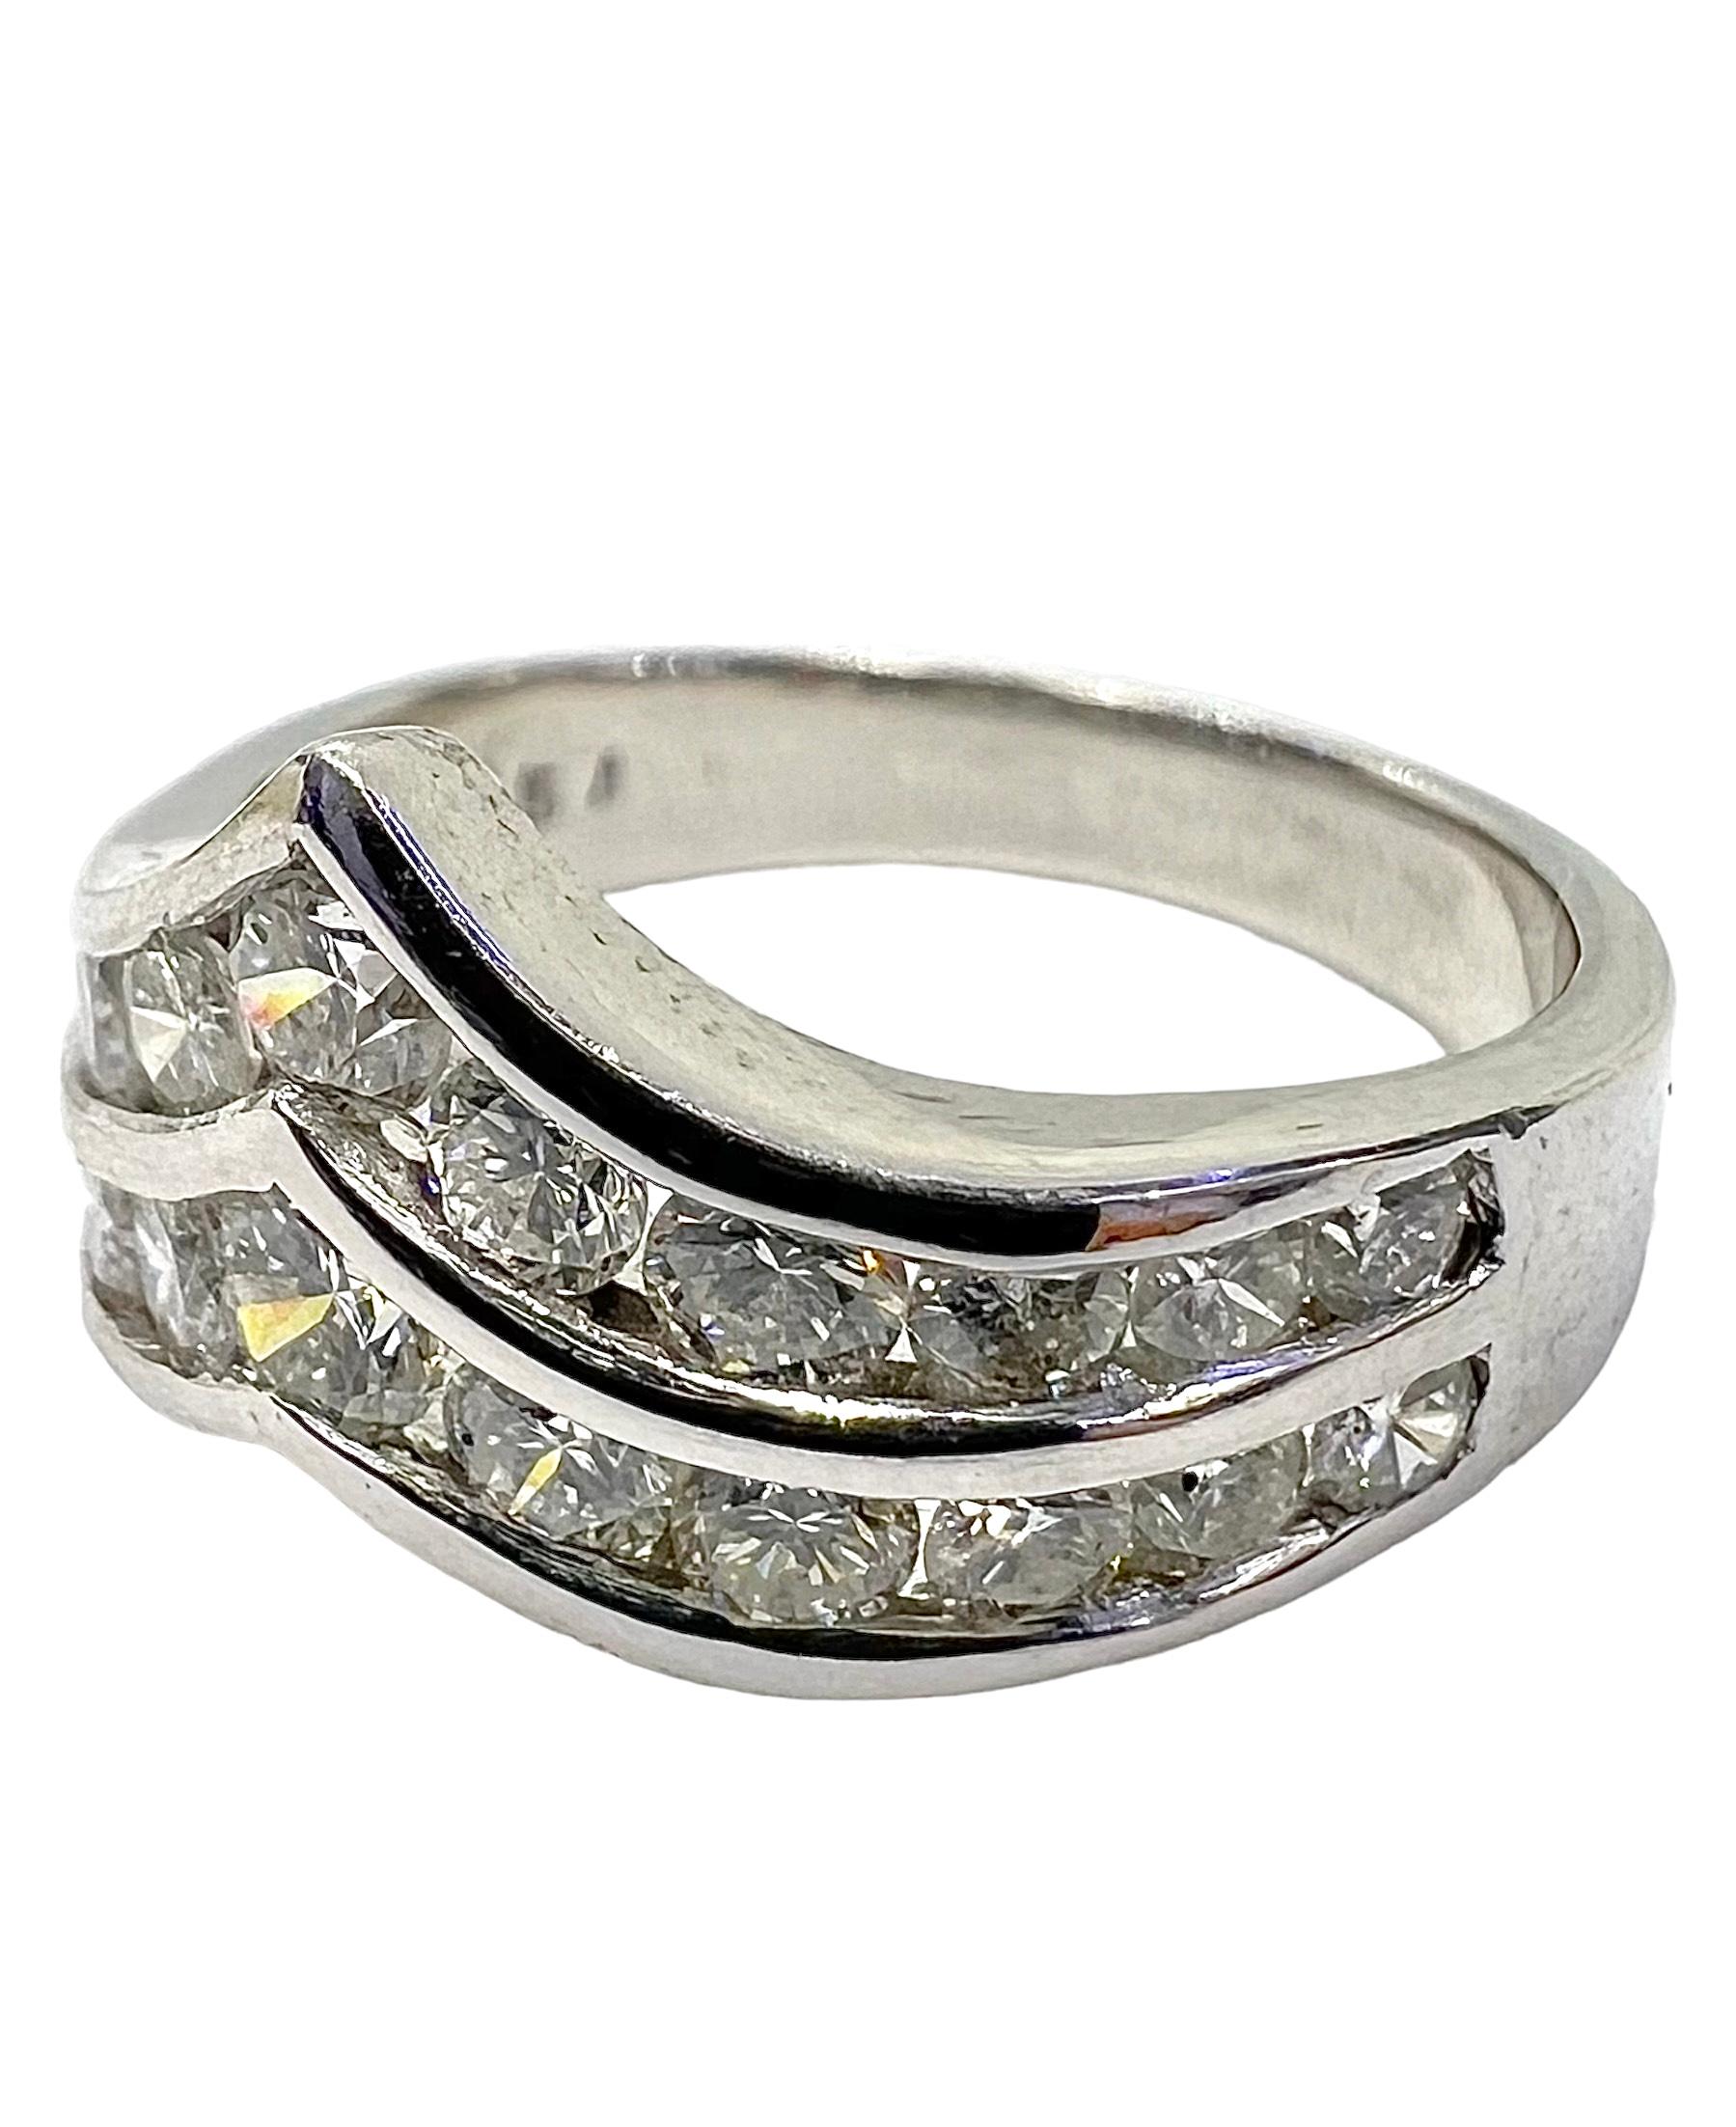 Platinum ring with 1.54 carats of round diamonds.

Sophia D by Joseph Dardashti LTD has been known worldwide for 35 years and are inspired by classic Art Deco design that merges with modern manufacturing techniques.